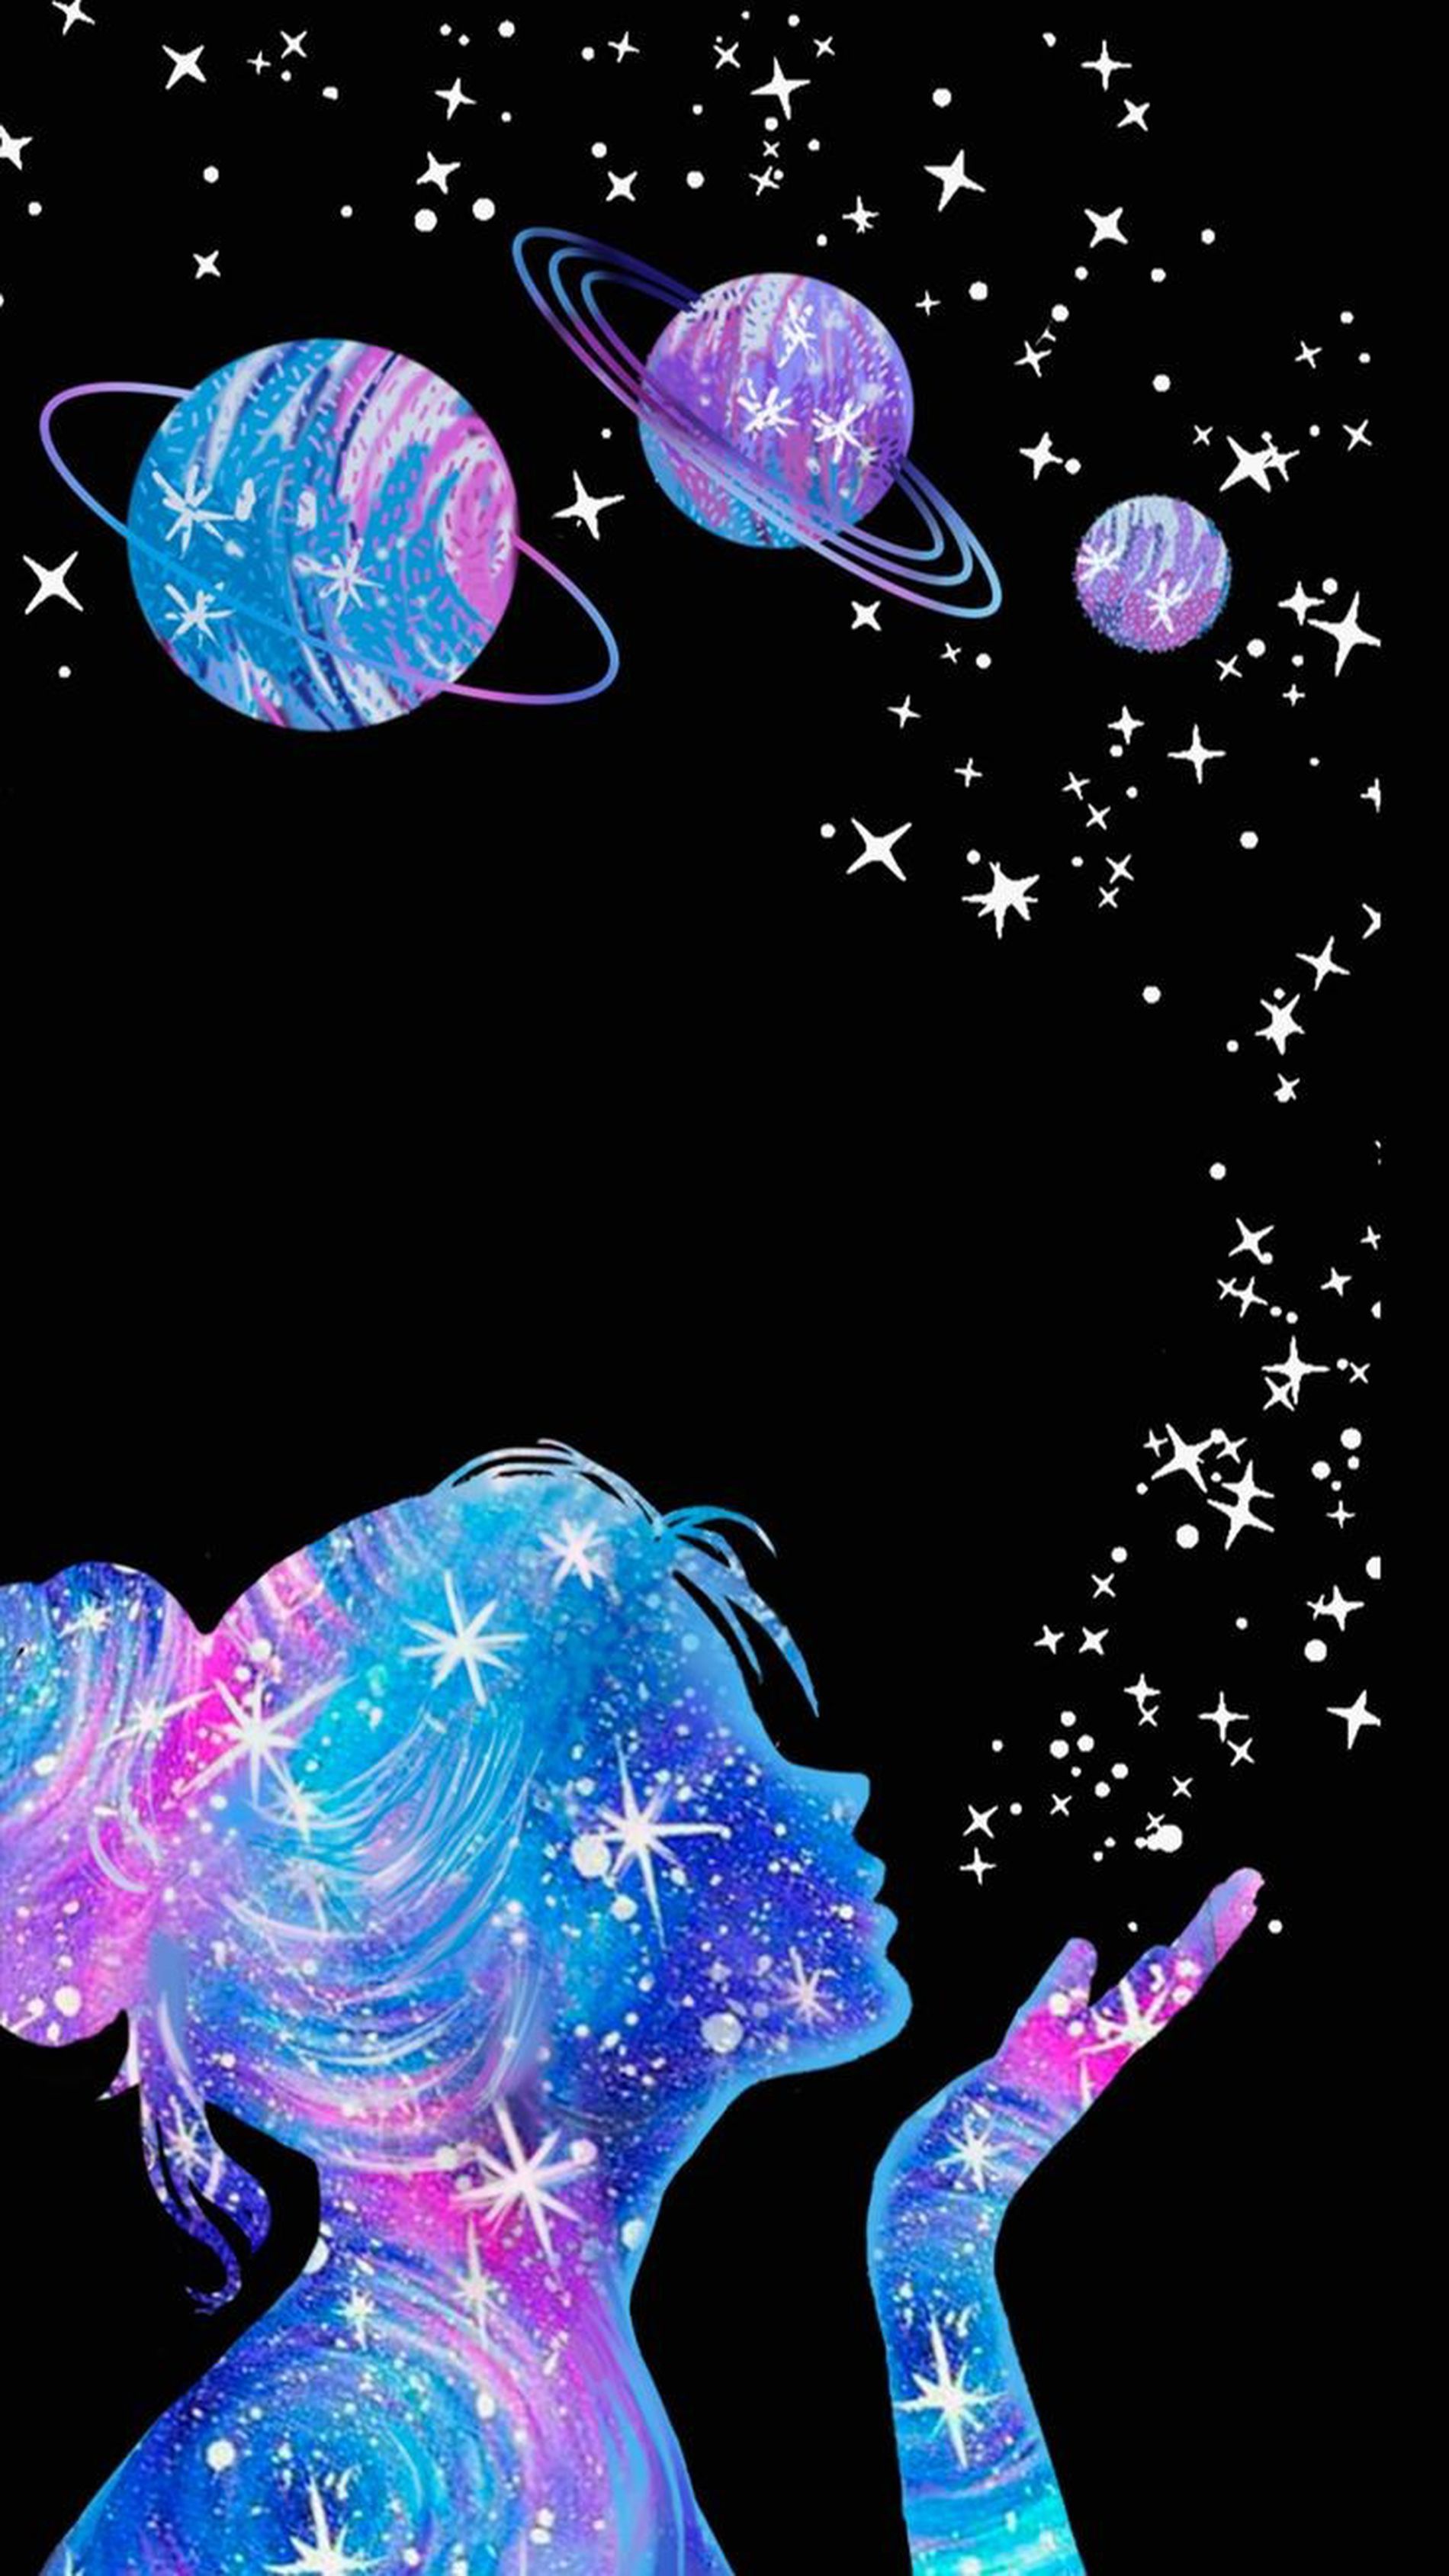 100+ Galaxy Wallpapers - World of Printables